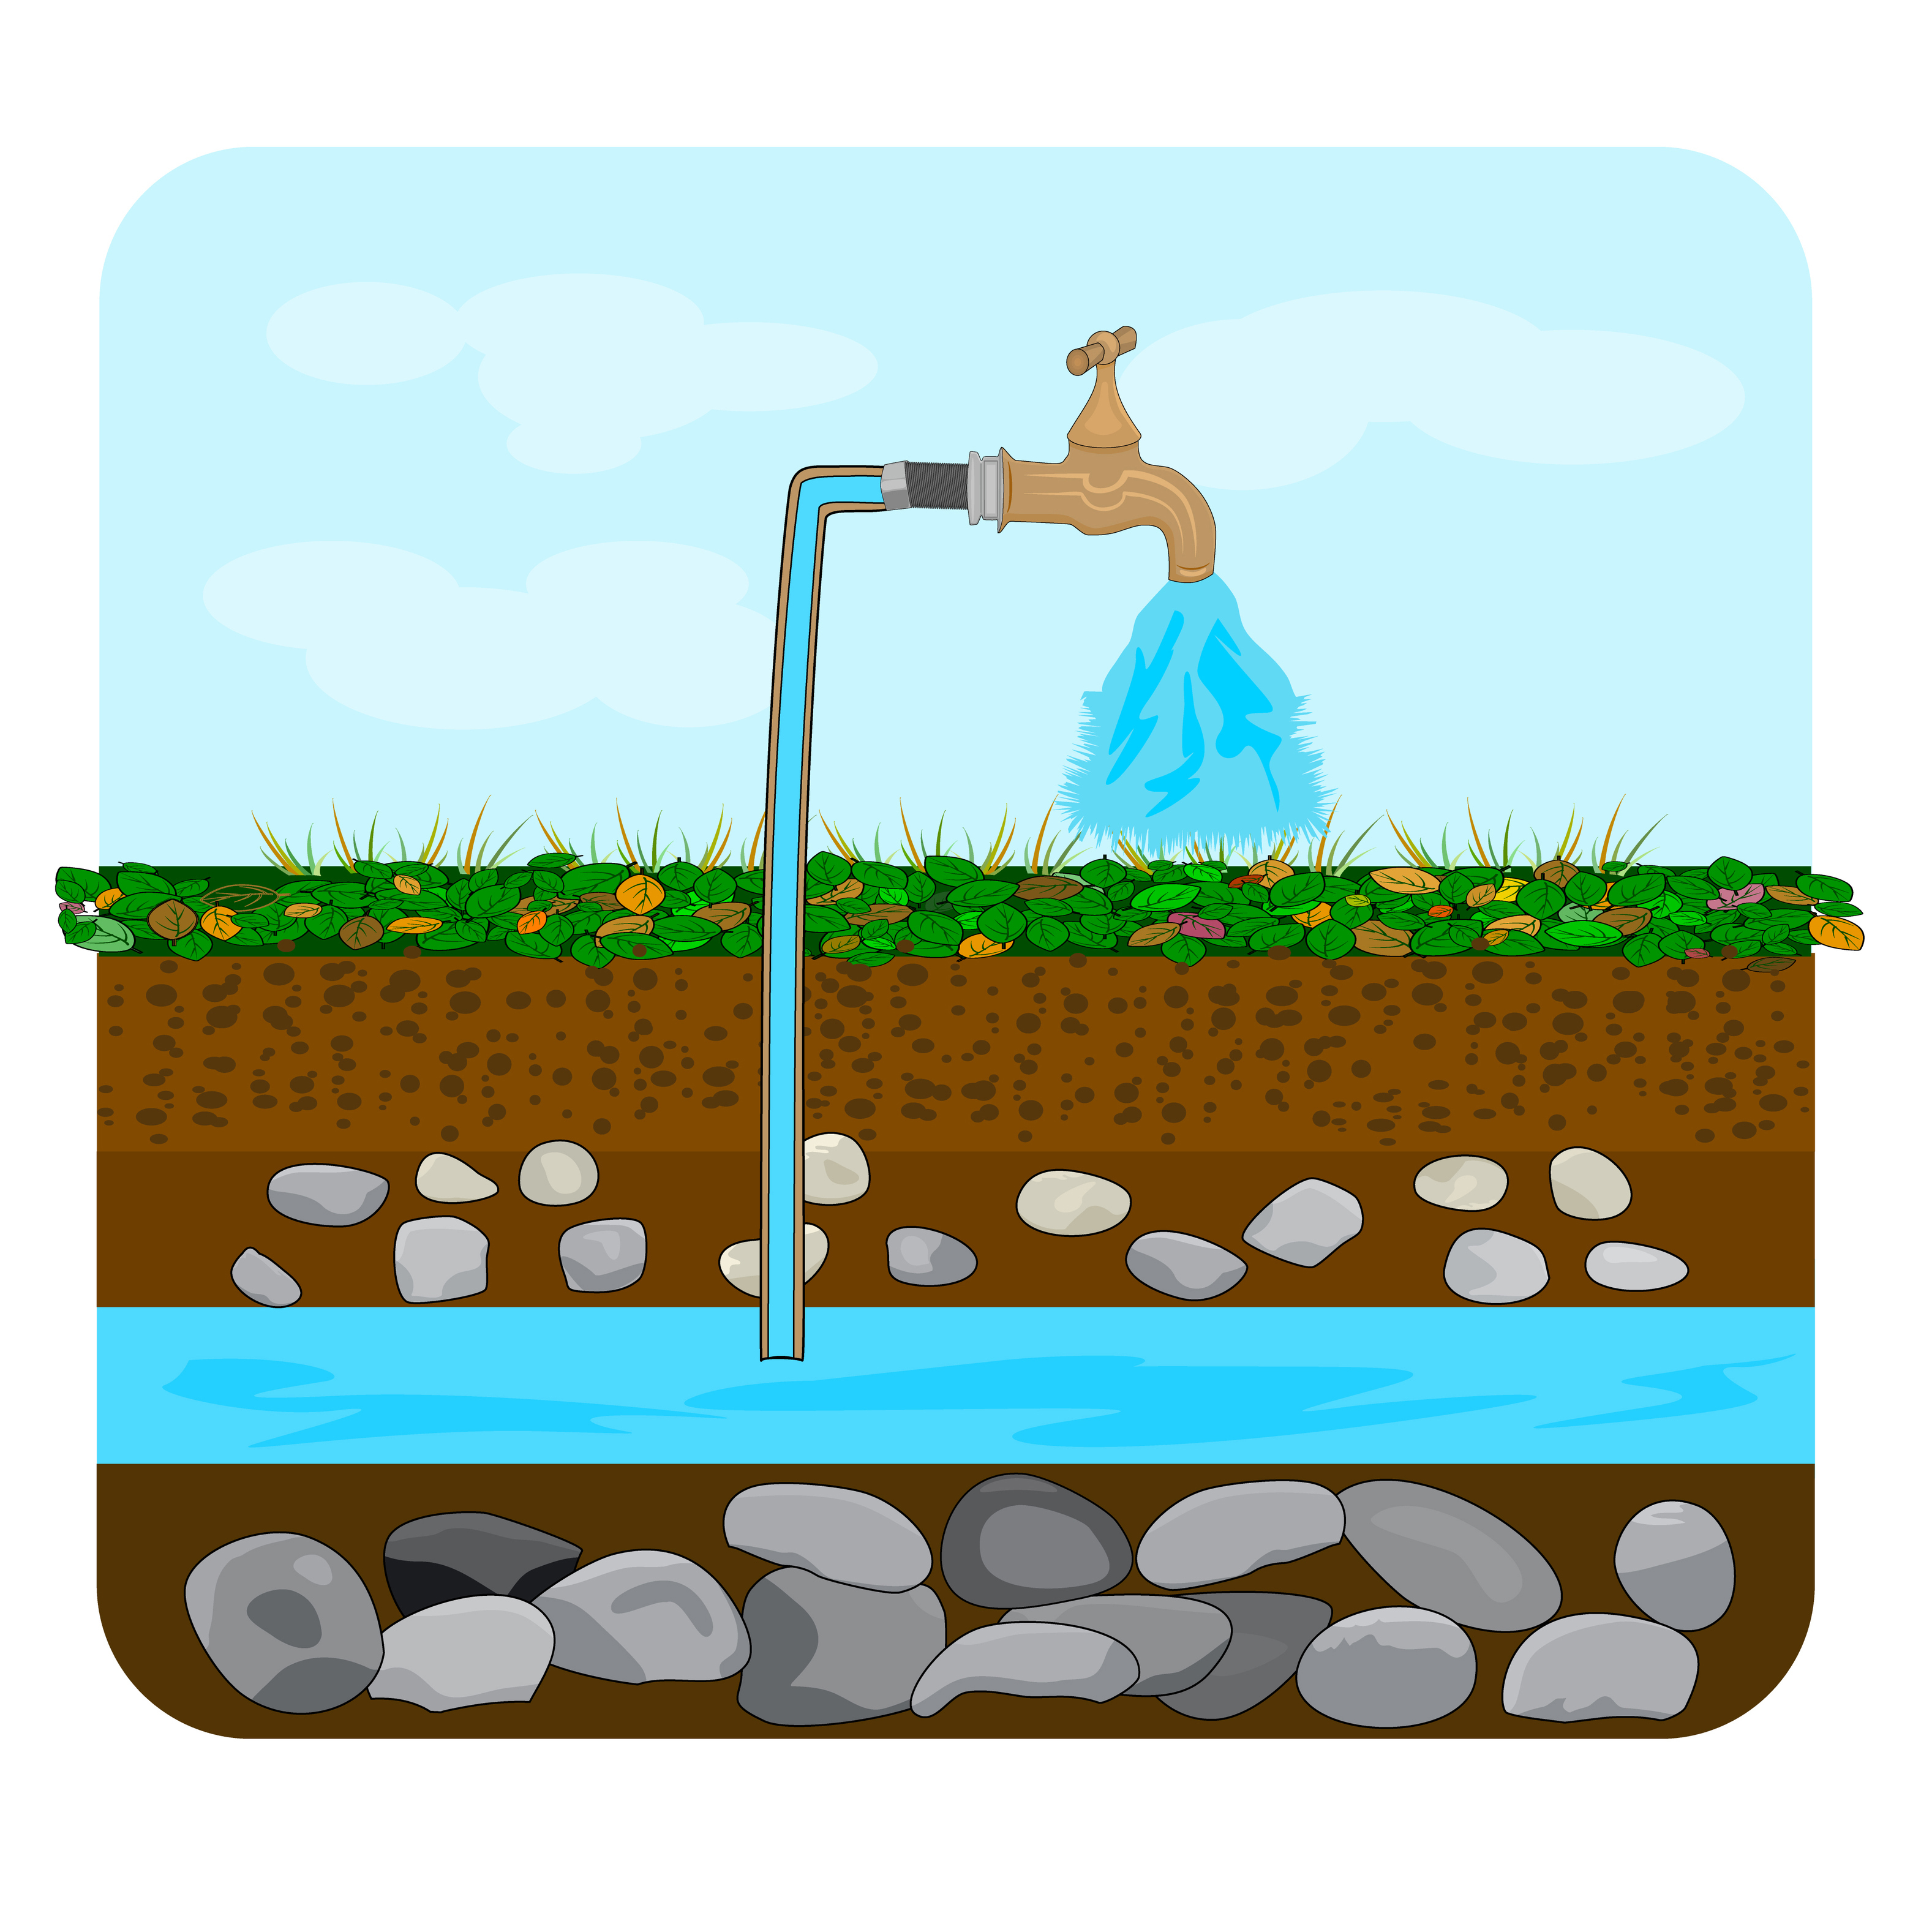 Graphic illustrating groundwater